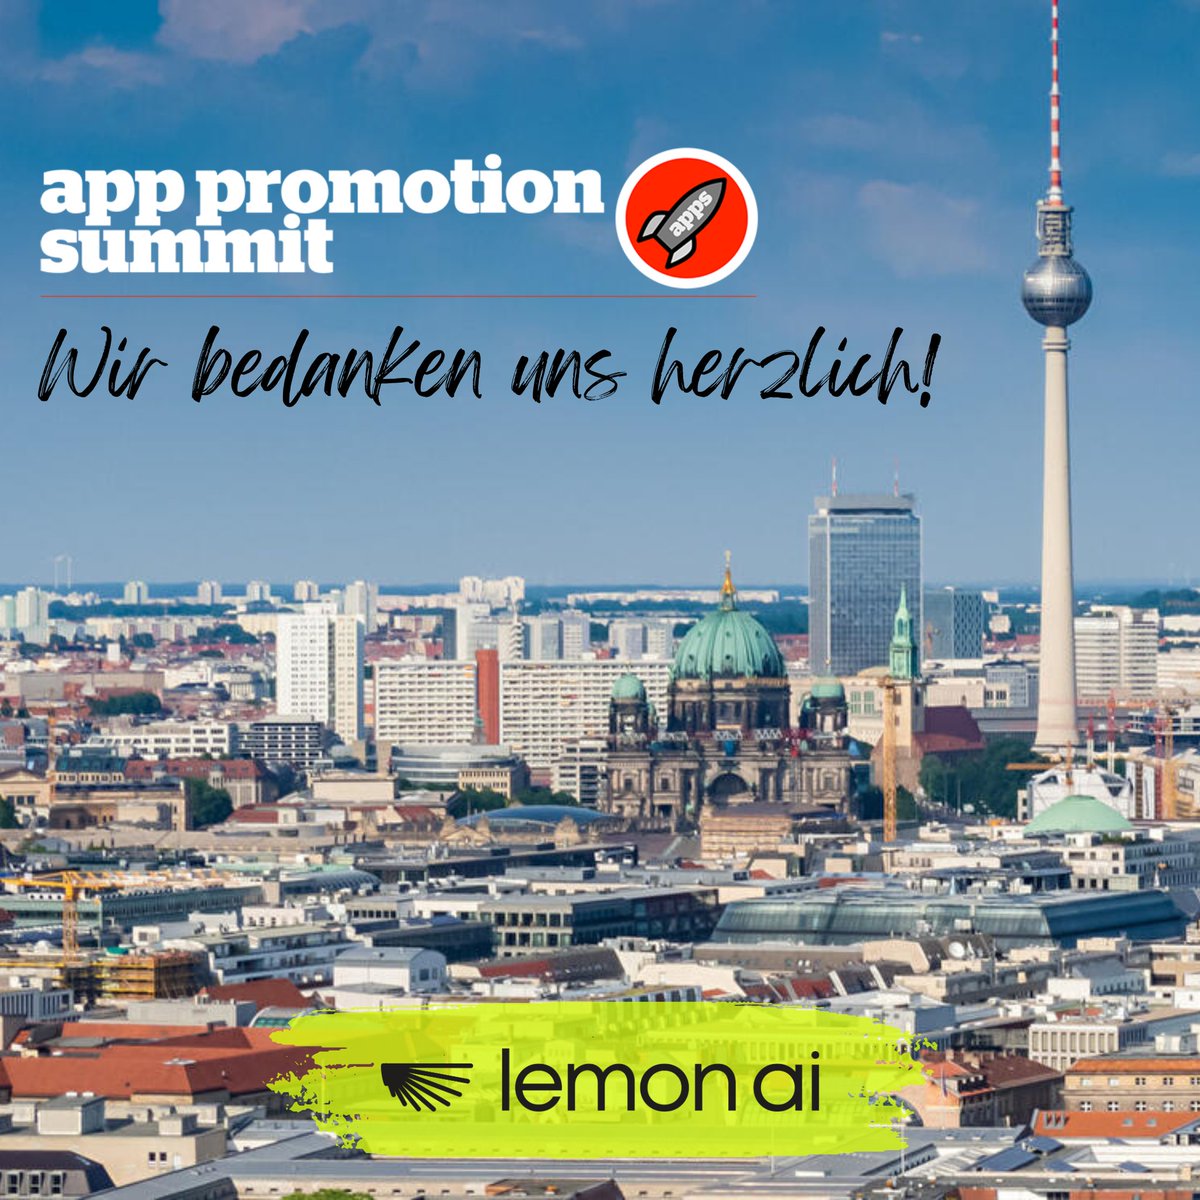 👏App-lause, @apppromotion
🎯Incredibly relevant & fulfilling conference
🤝Met so many people who share our vision
😎See you next year, APS!
#apppromotionsummit #apsberlin #lemonai